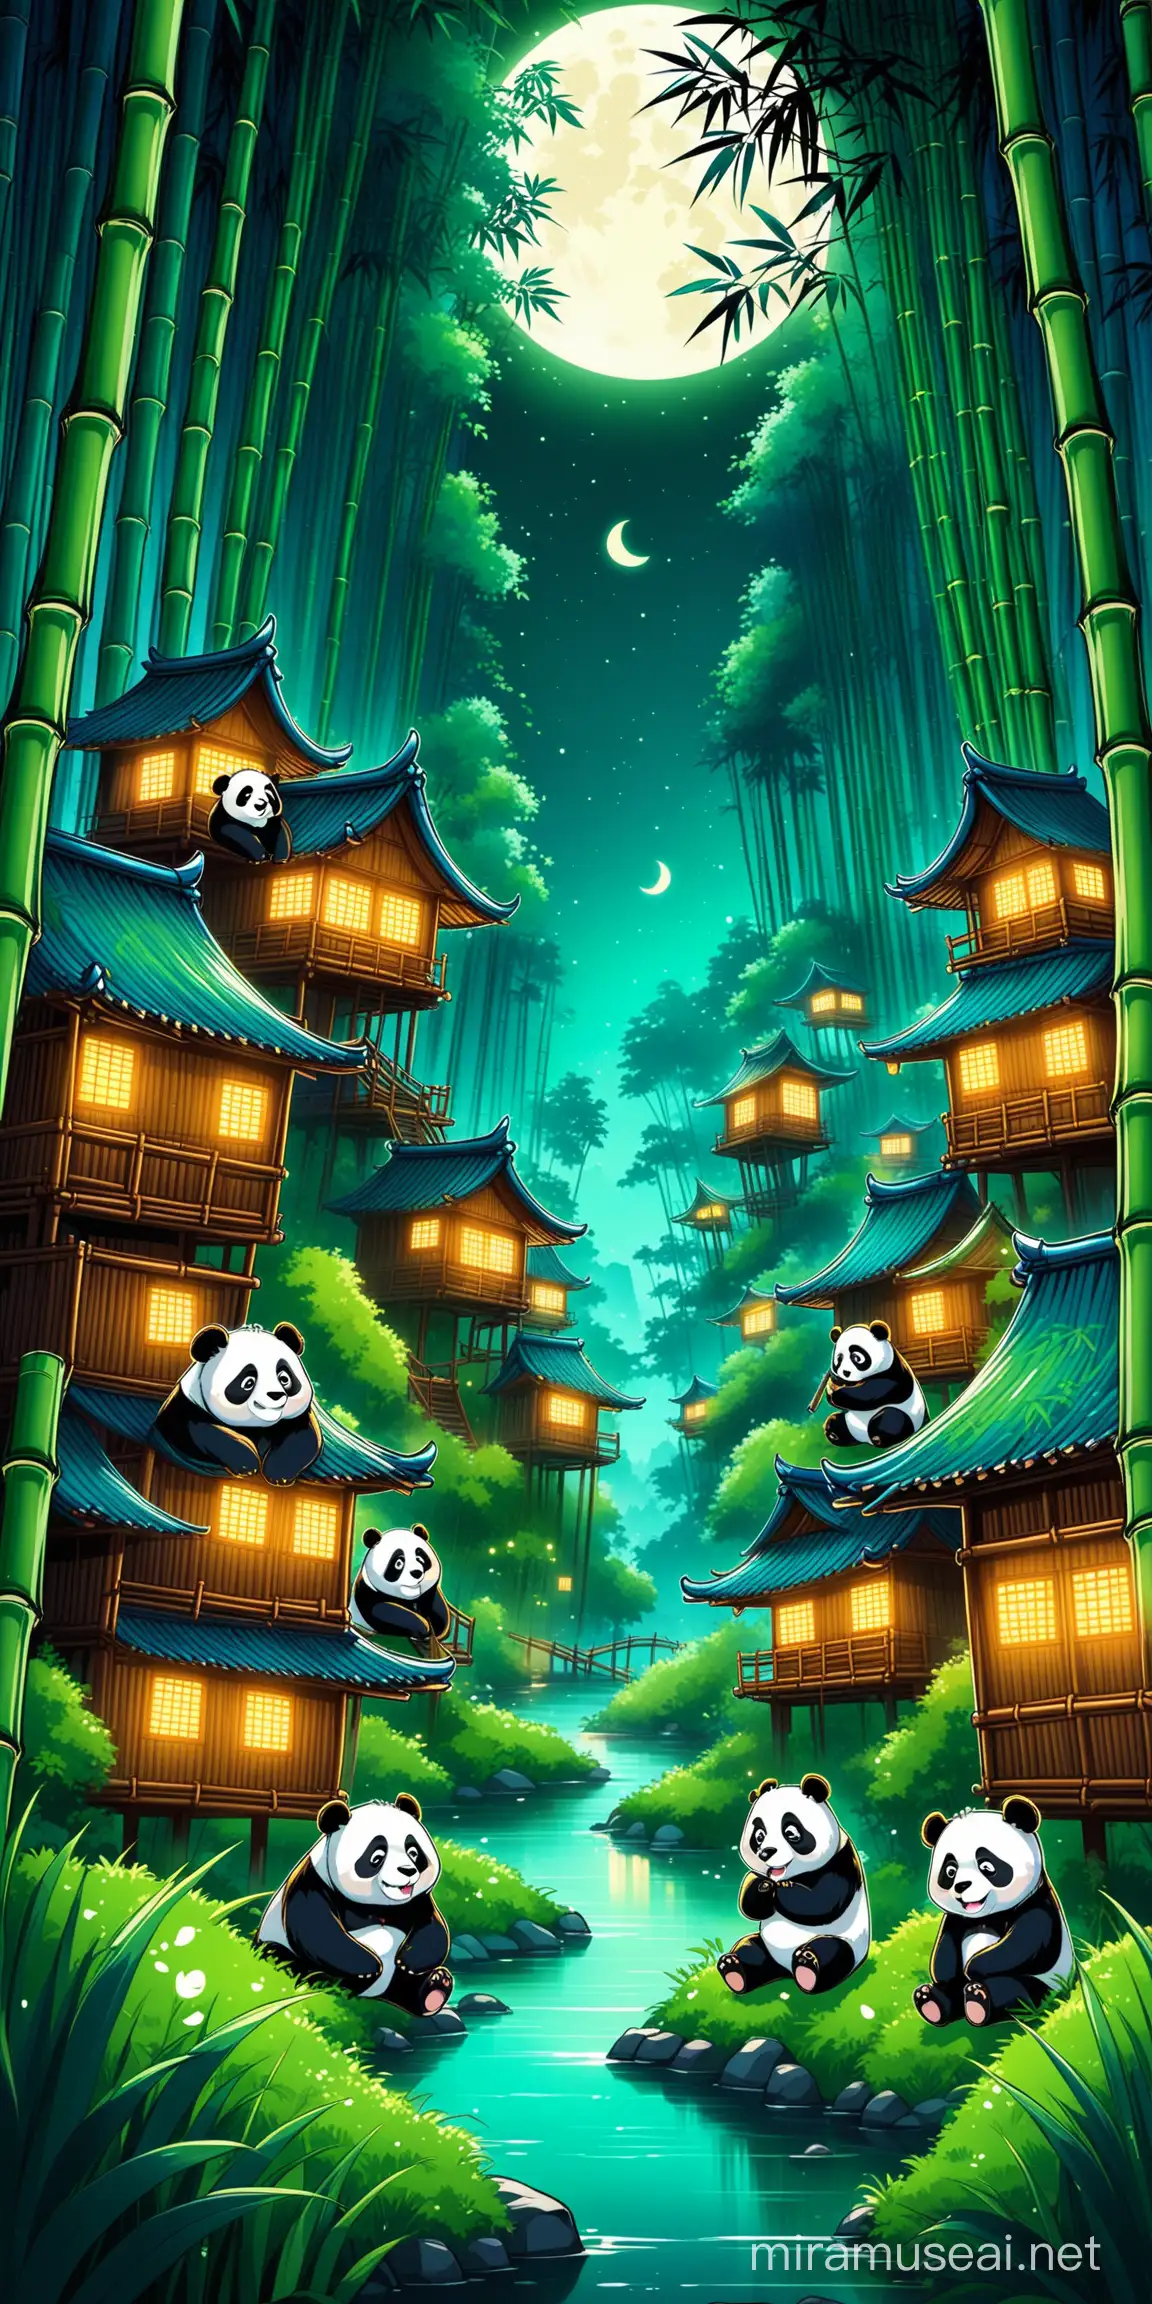 Cartoon Panda Family in Bamboo Forest at Night